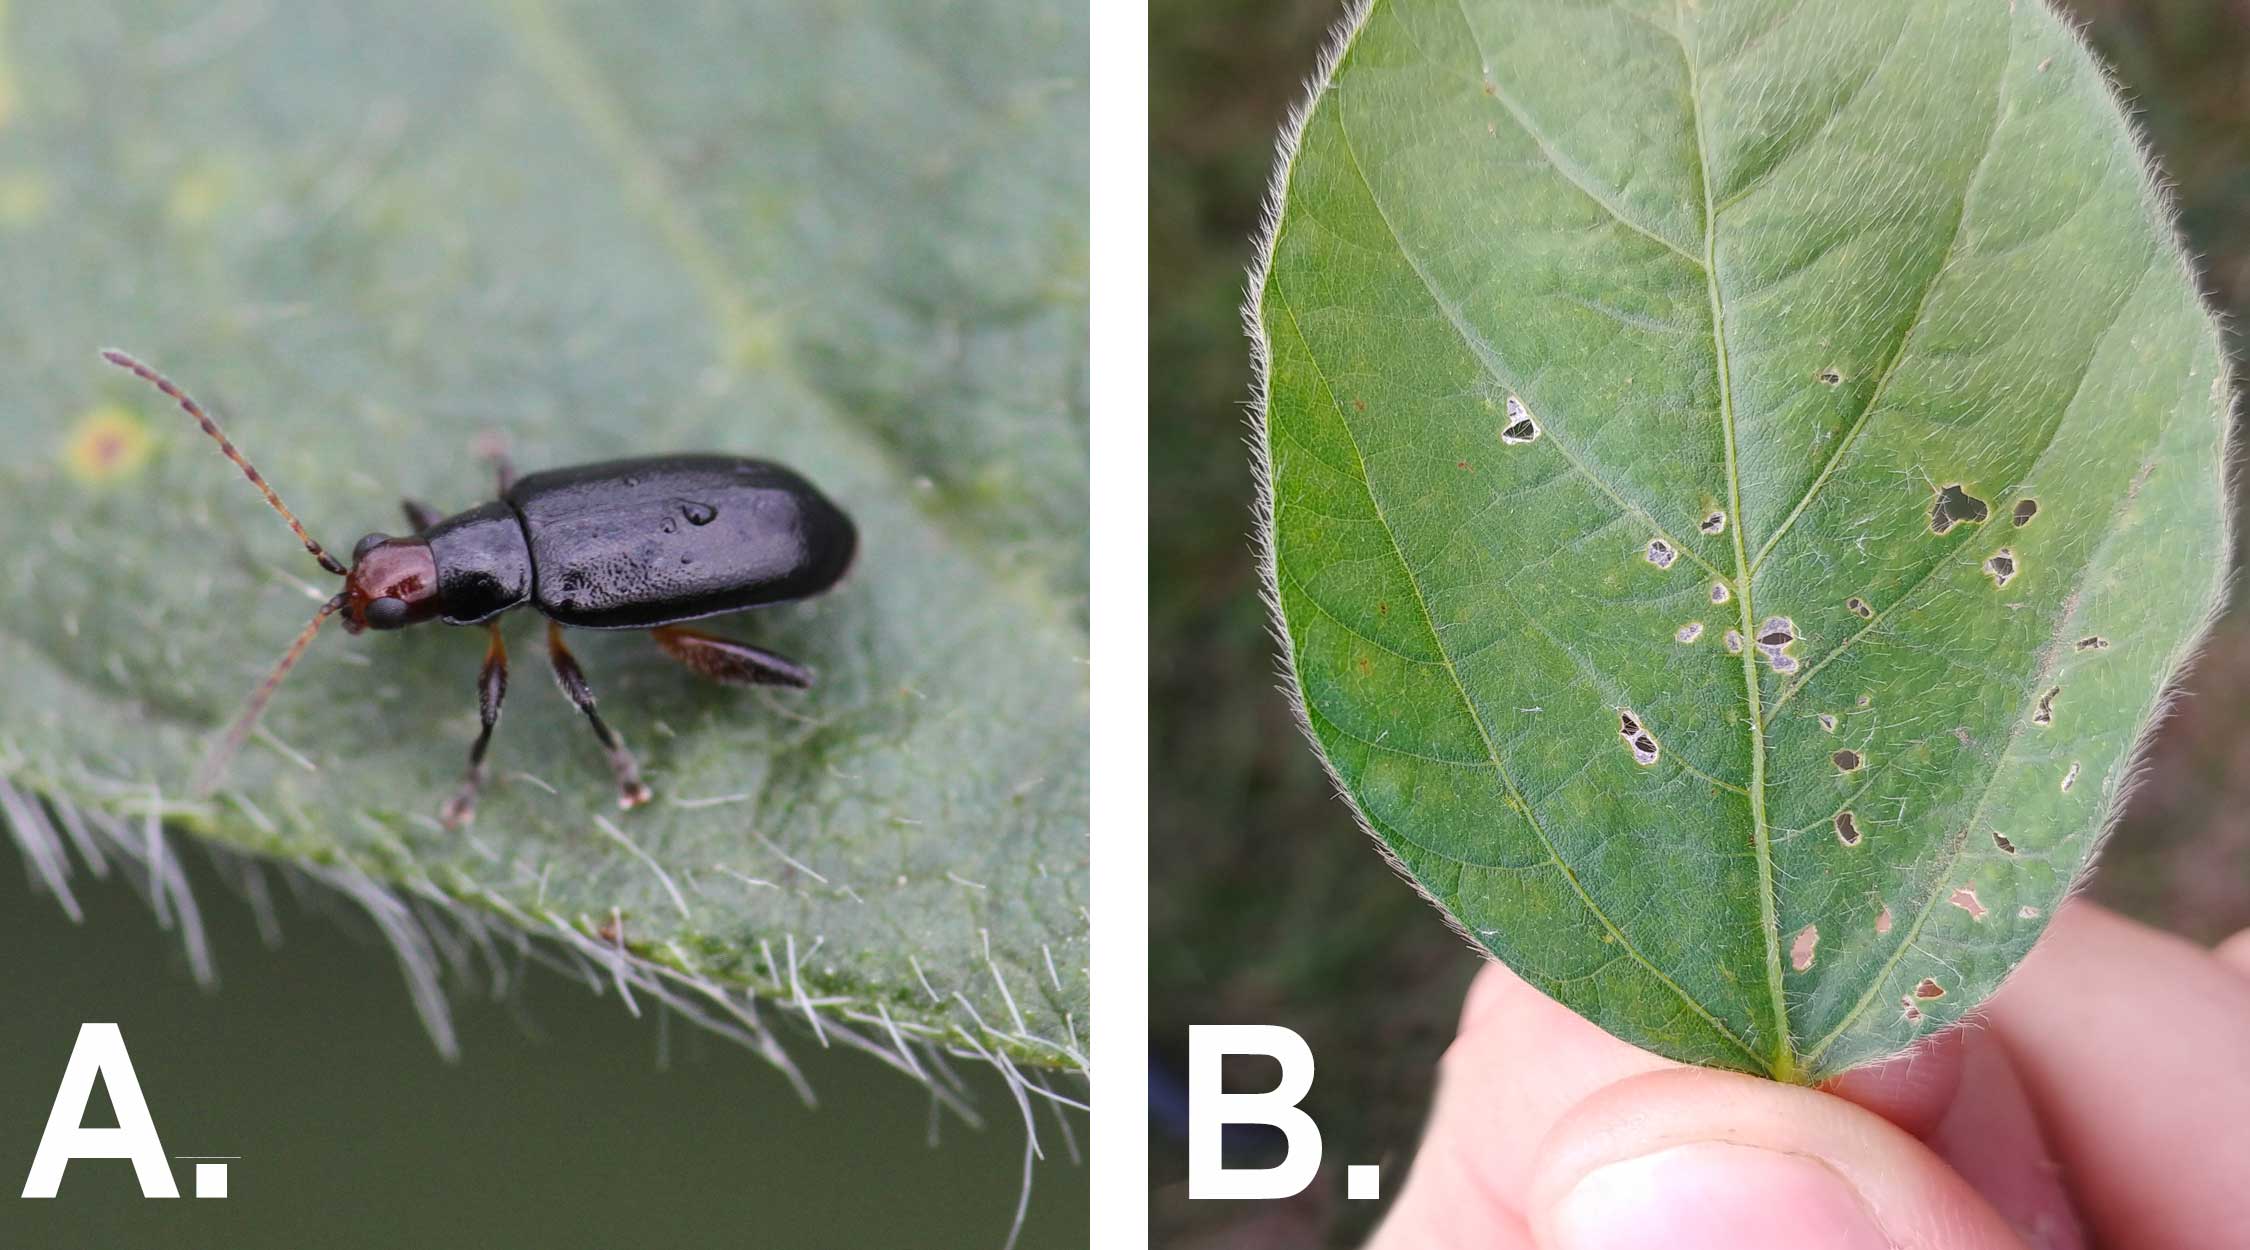 Left: Black beetle with a red head on soybean leaf. Right: Green soybean leaf with small holes near the center and edges.